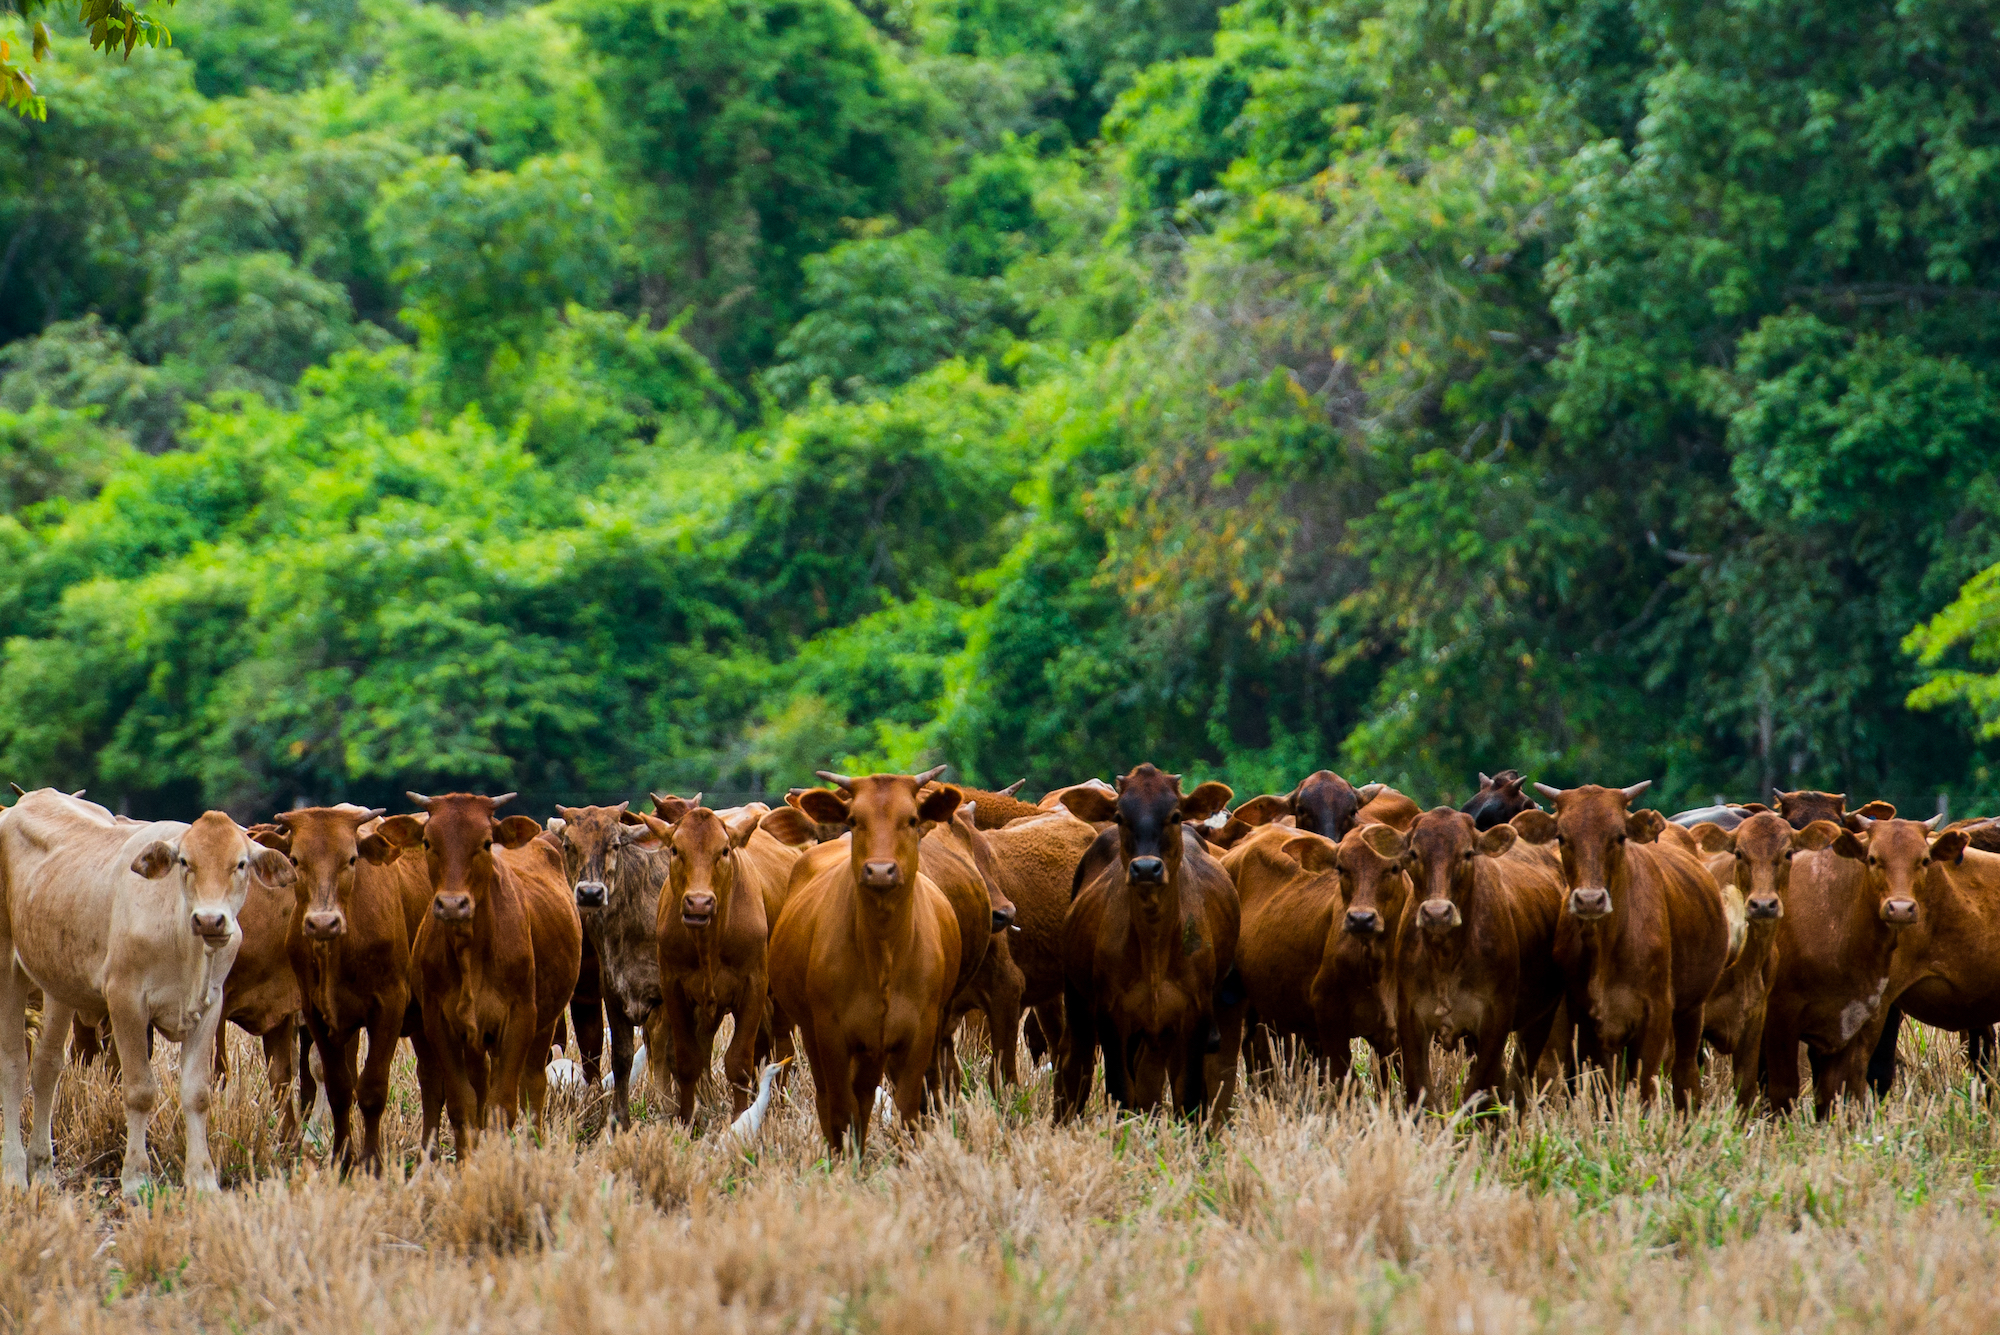 A large group of cows stands in front of a forest.